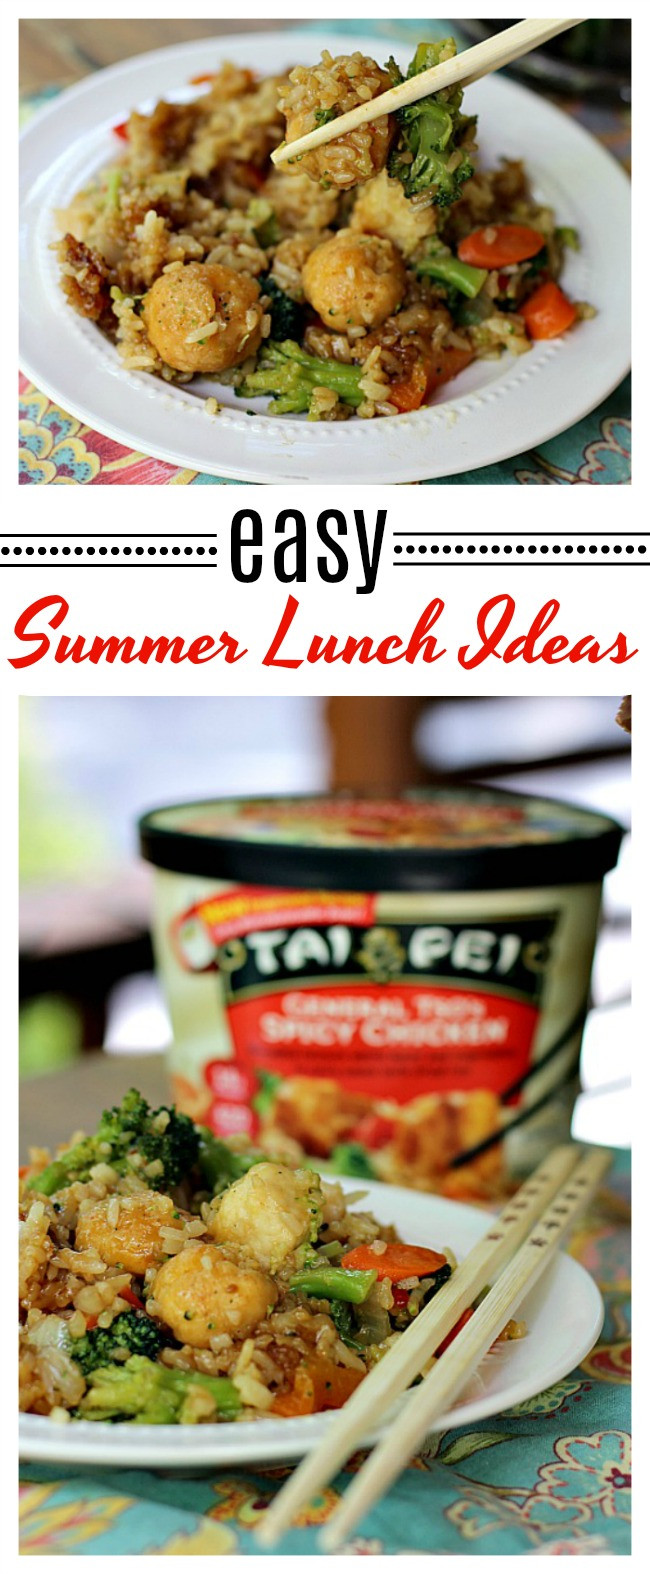 Summer Lunch Ideas
 Easy Summer Lunch Ideas The Adventures of J Man and